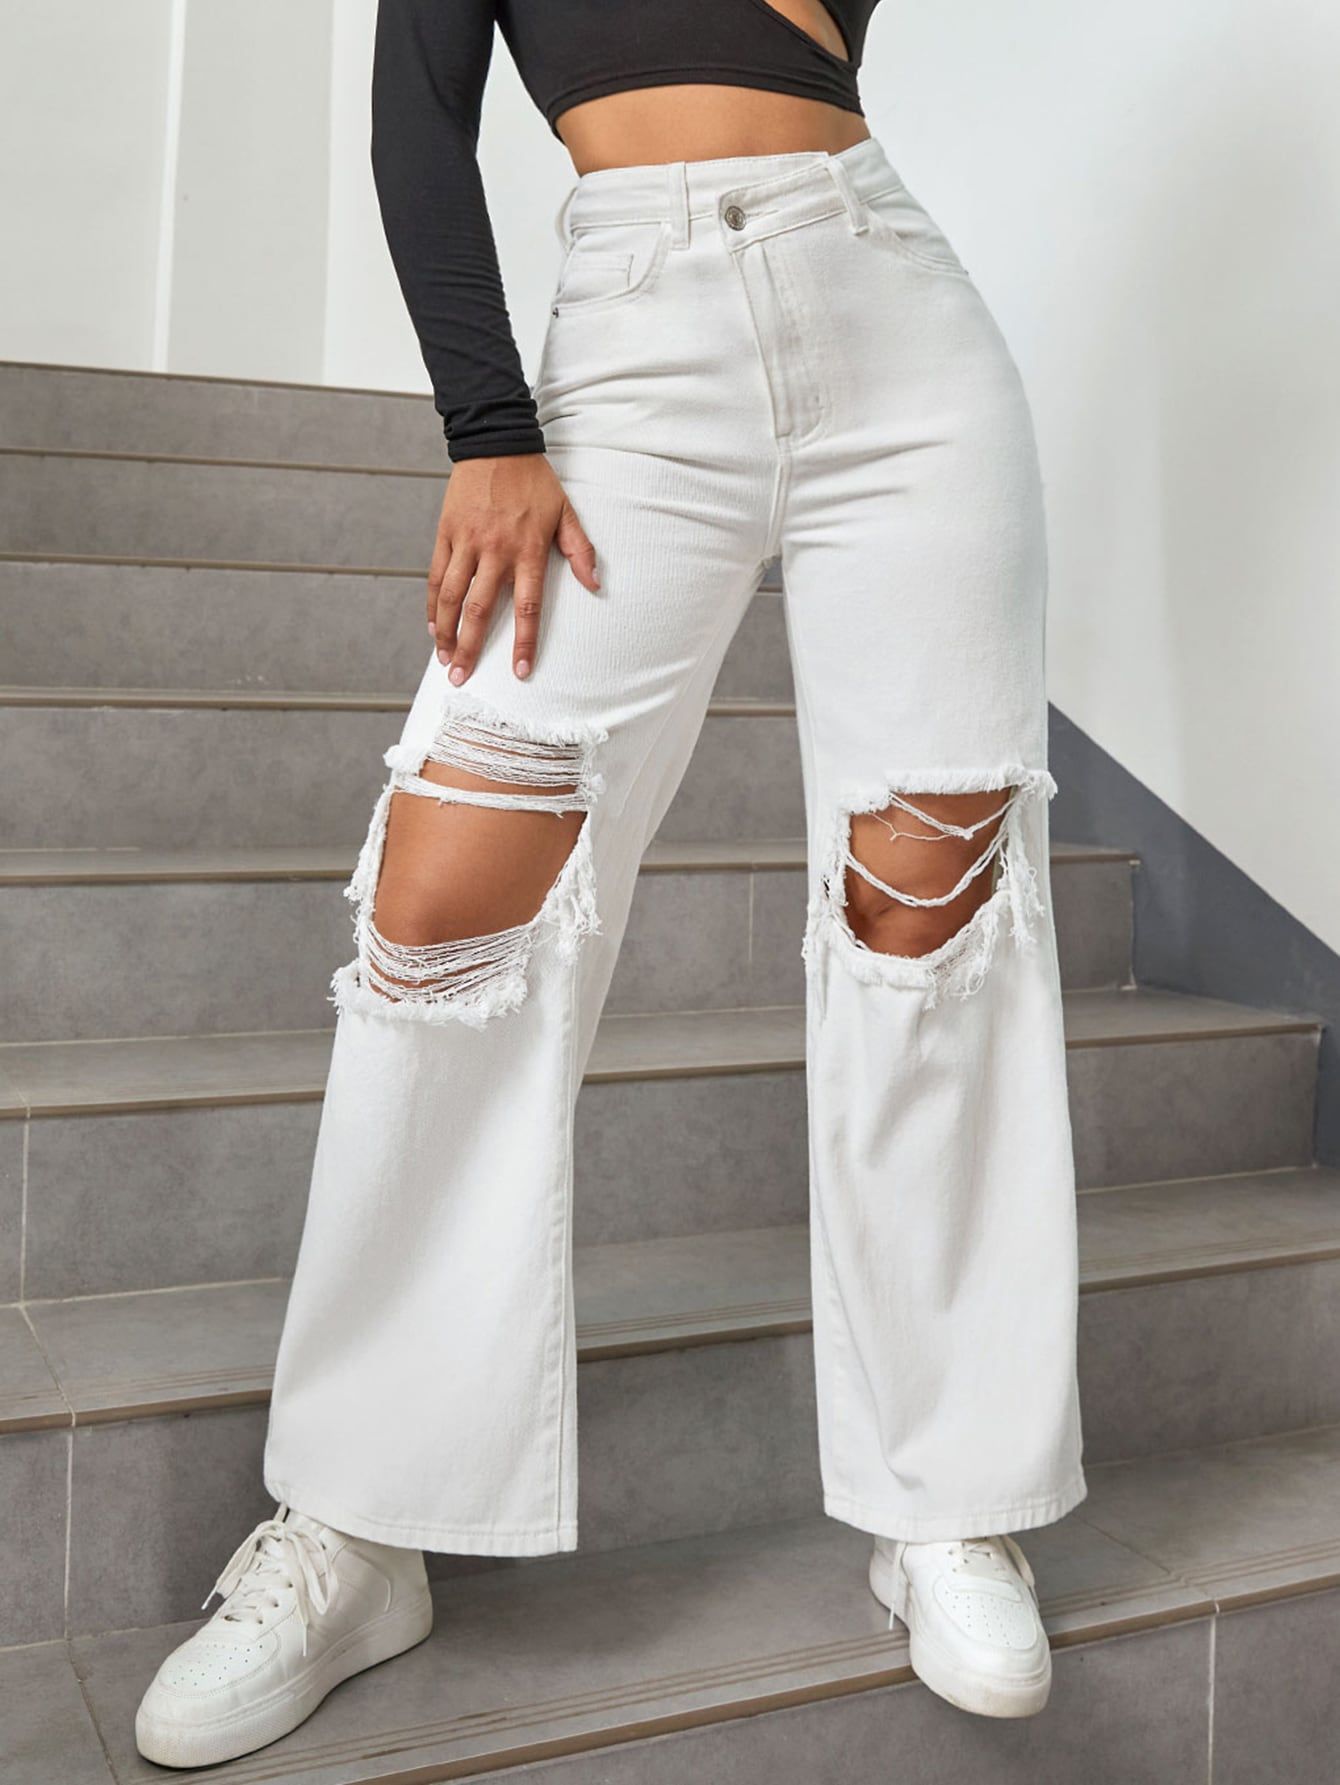 How to Wear White Ripped Jeans: Top 15
Cool & Refreshing Outfits for Ladies